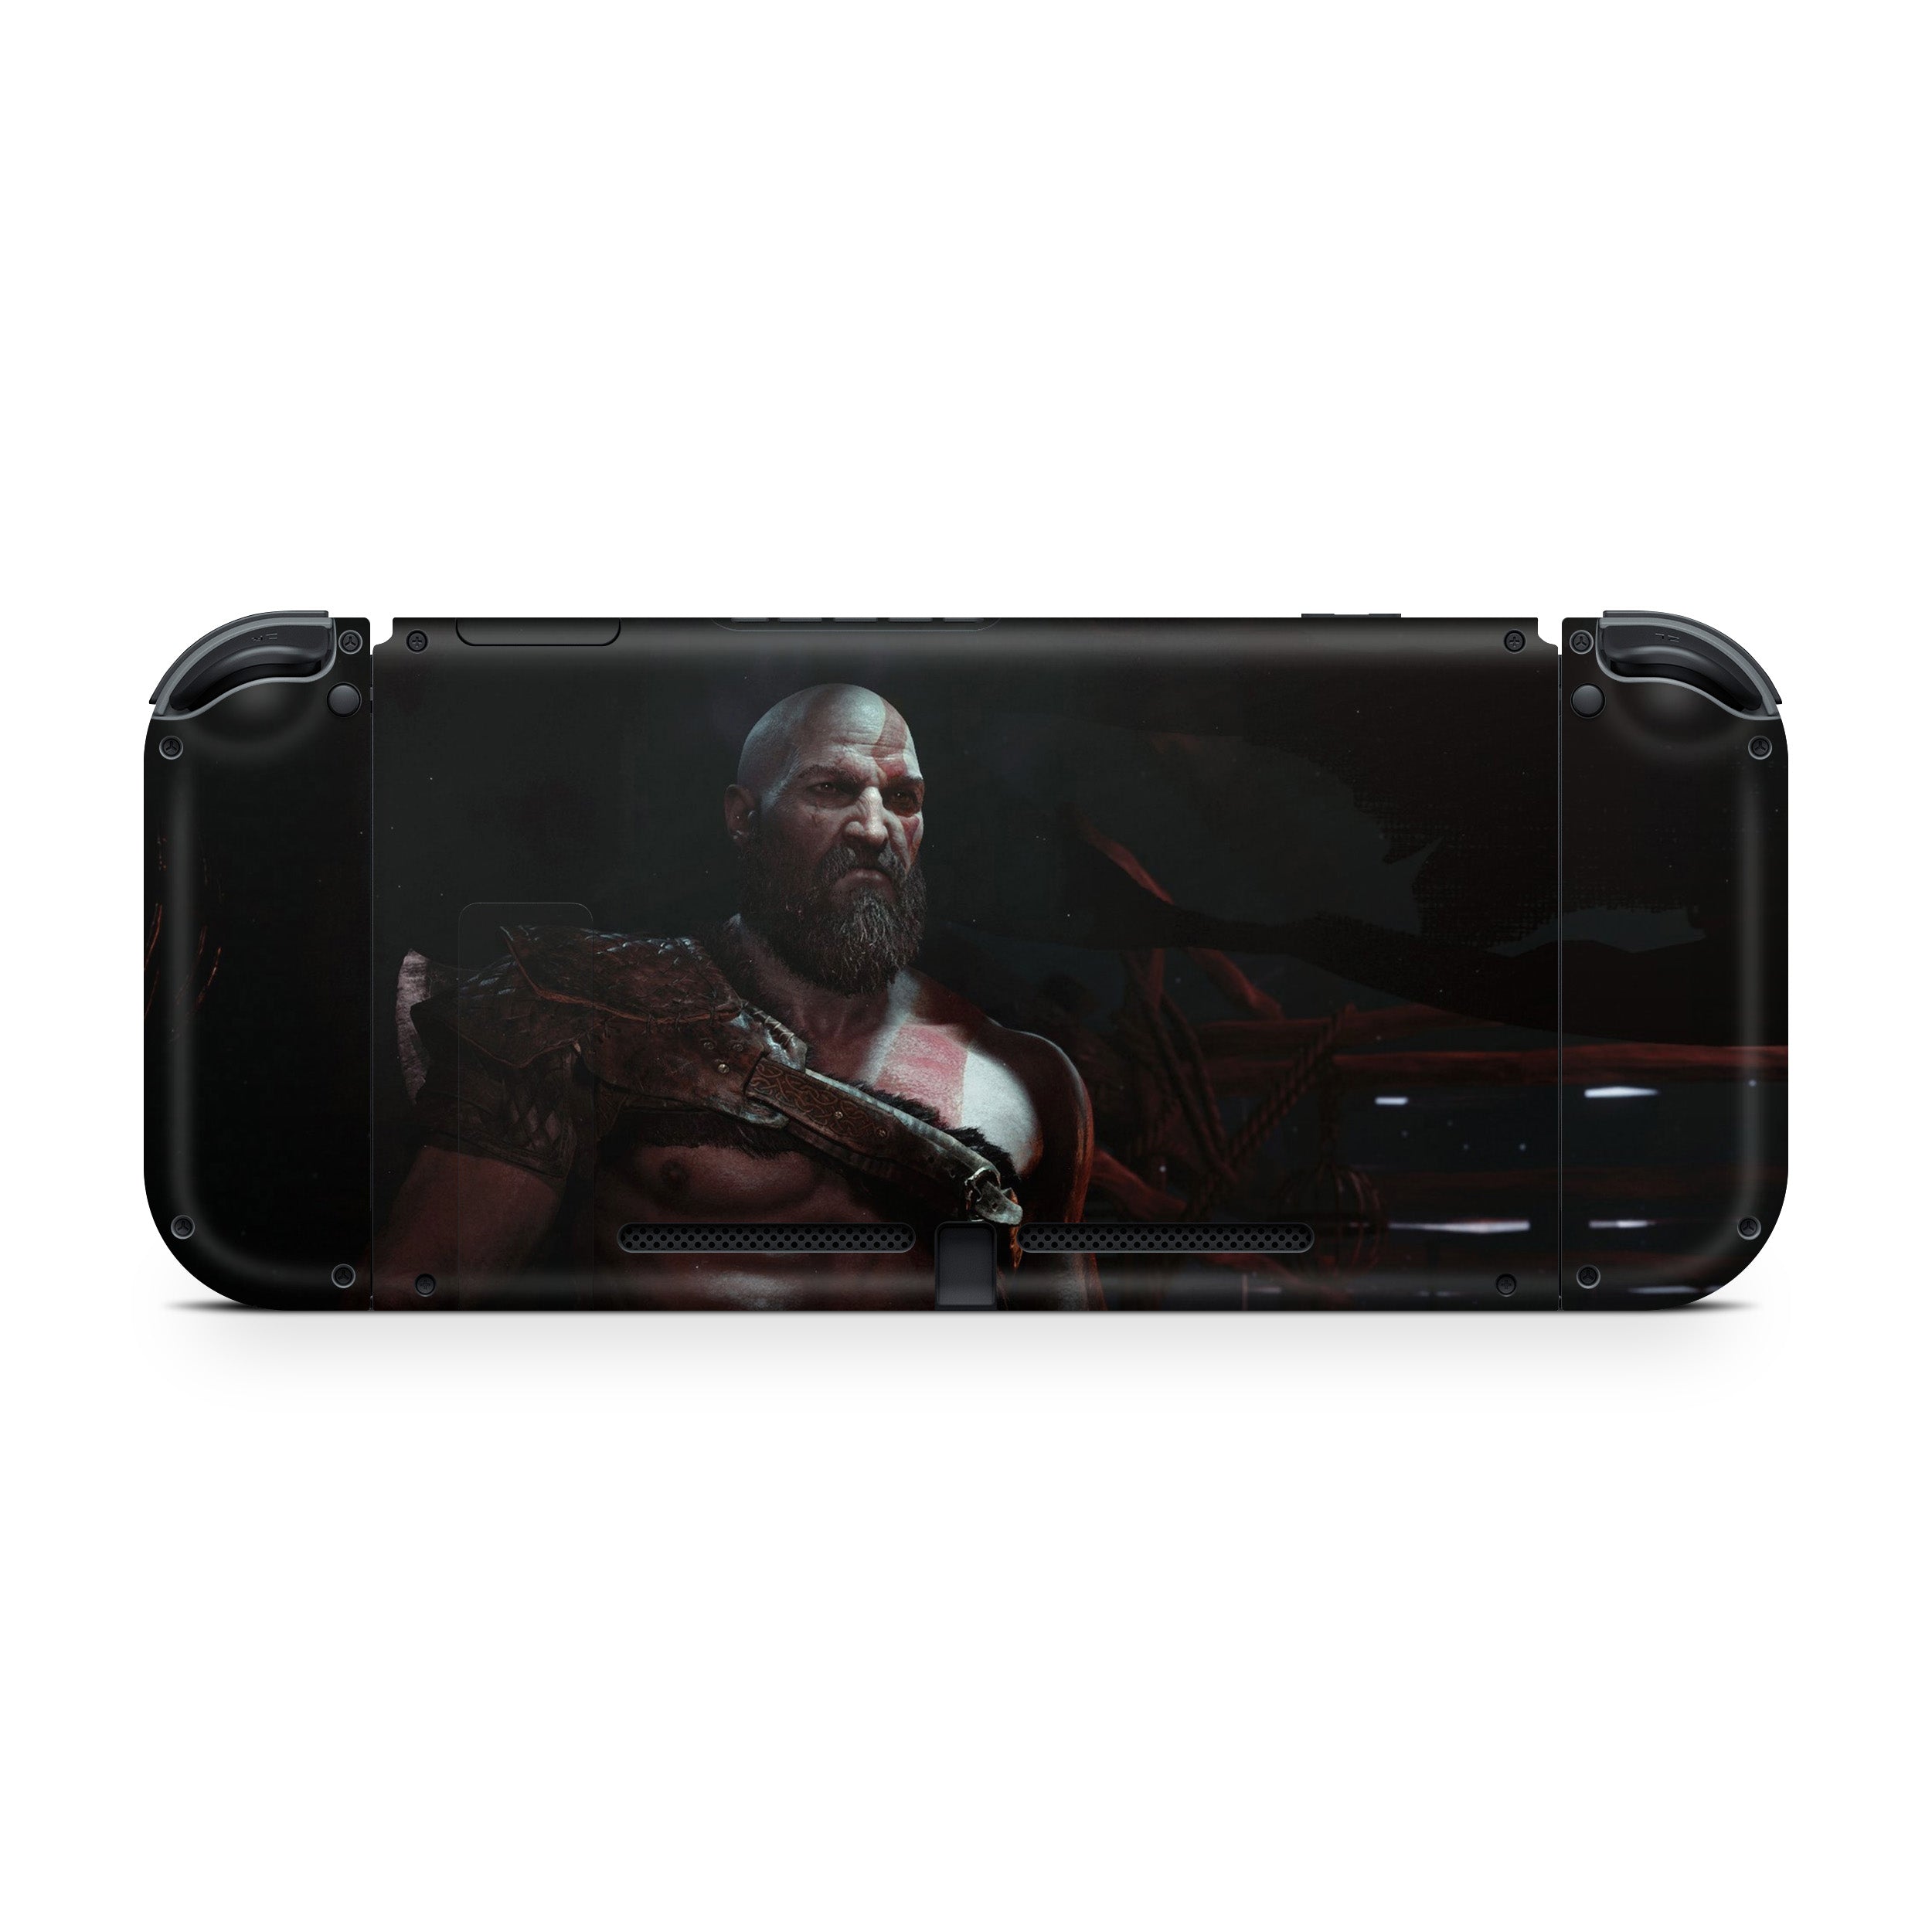 A video game skin featuring a God Of War design for the Nintendo Switch.